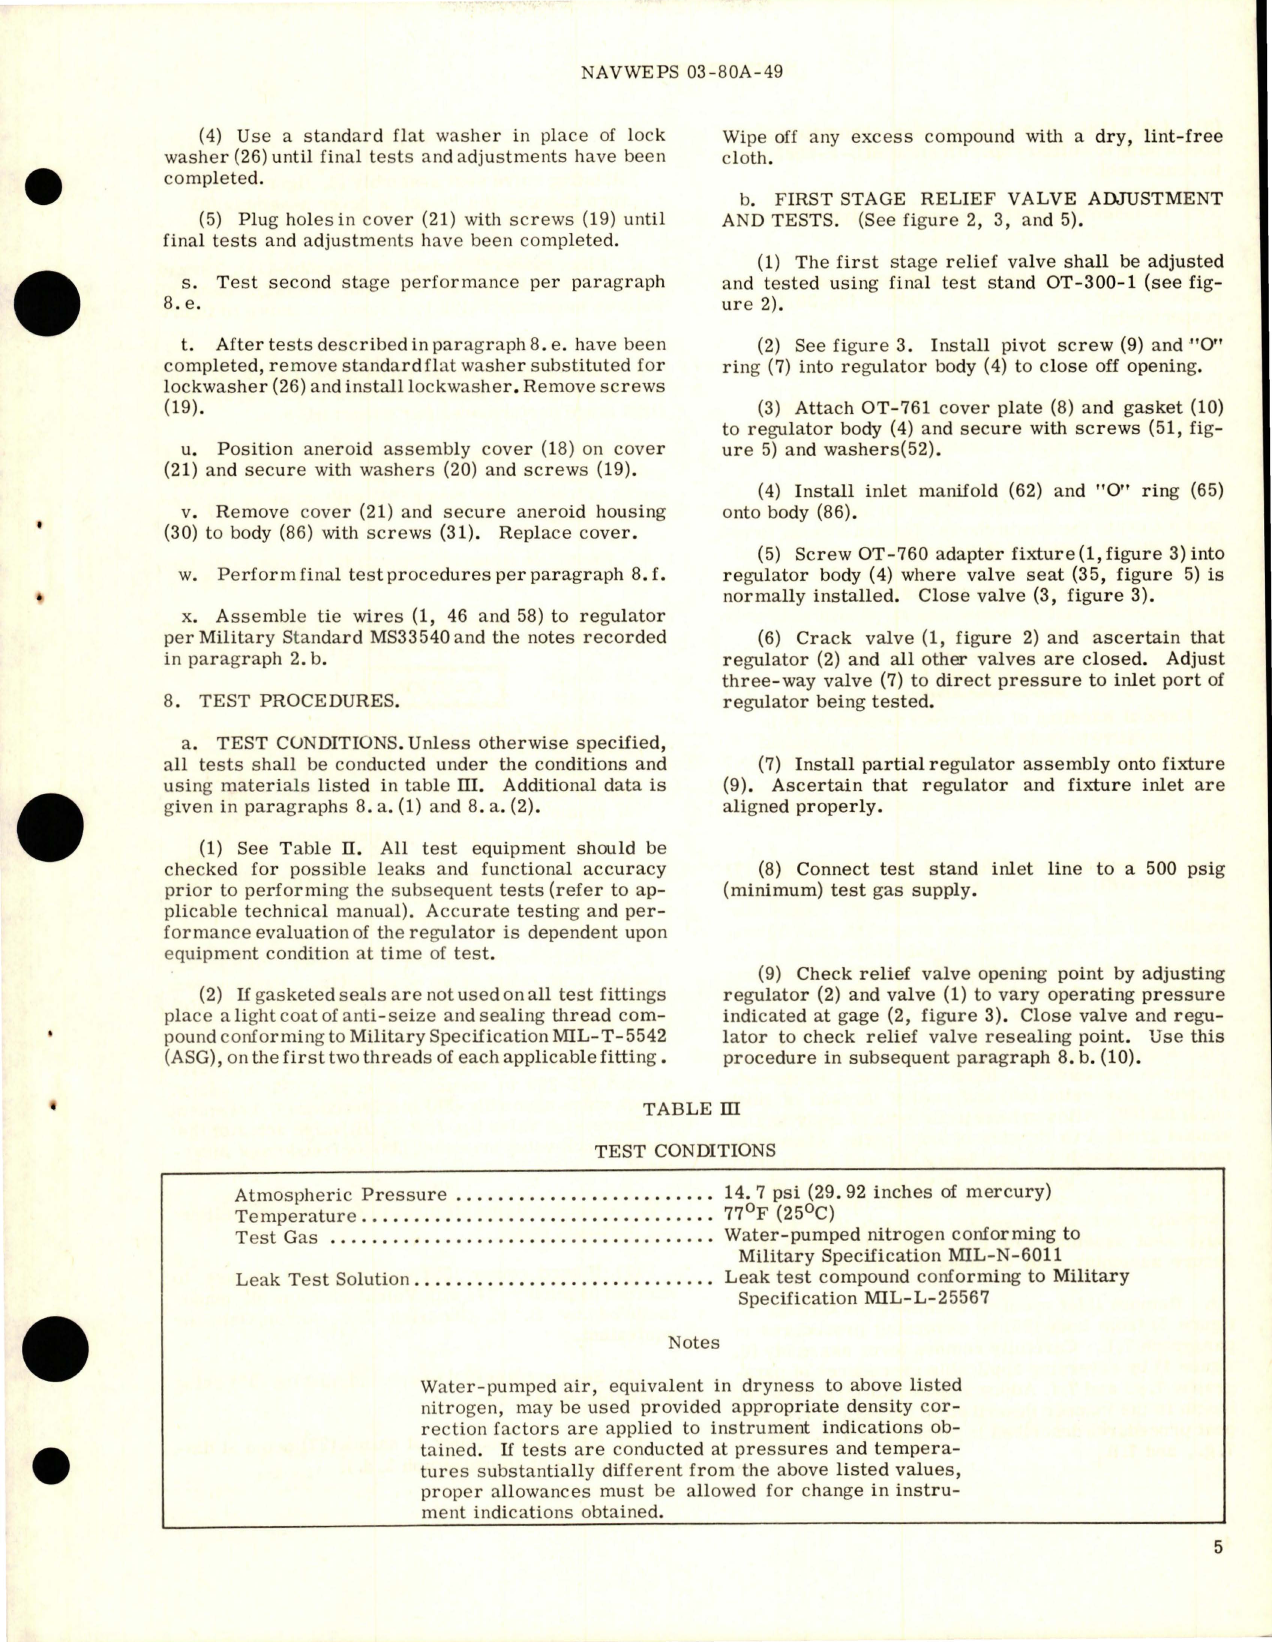 Sample page 7 from AirCorps Library document: Overhaul Instructions with Parts Breakdown for Absolute Pressure Regulator